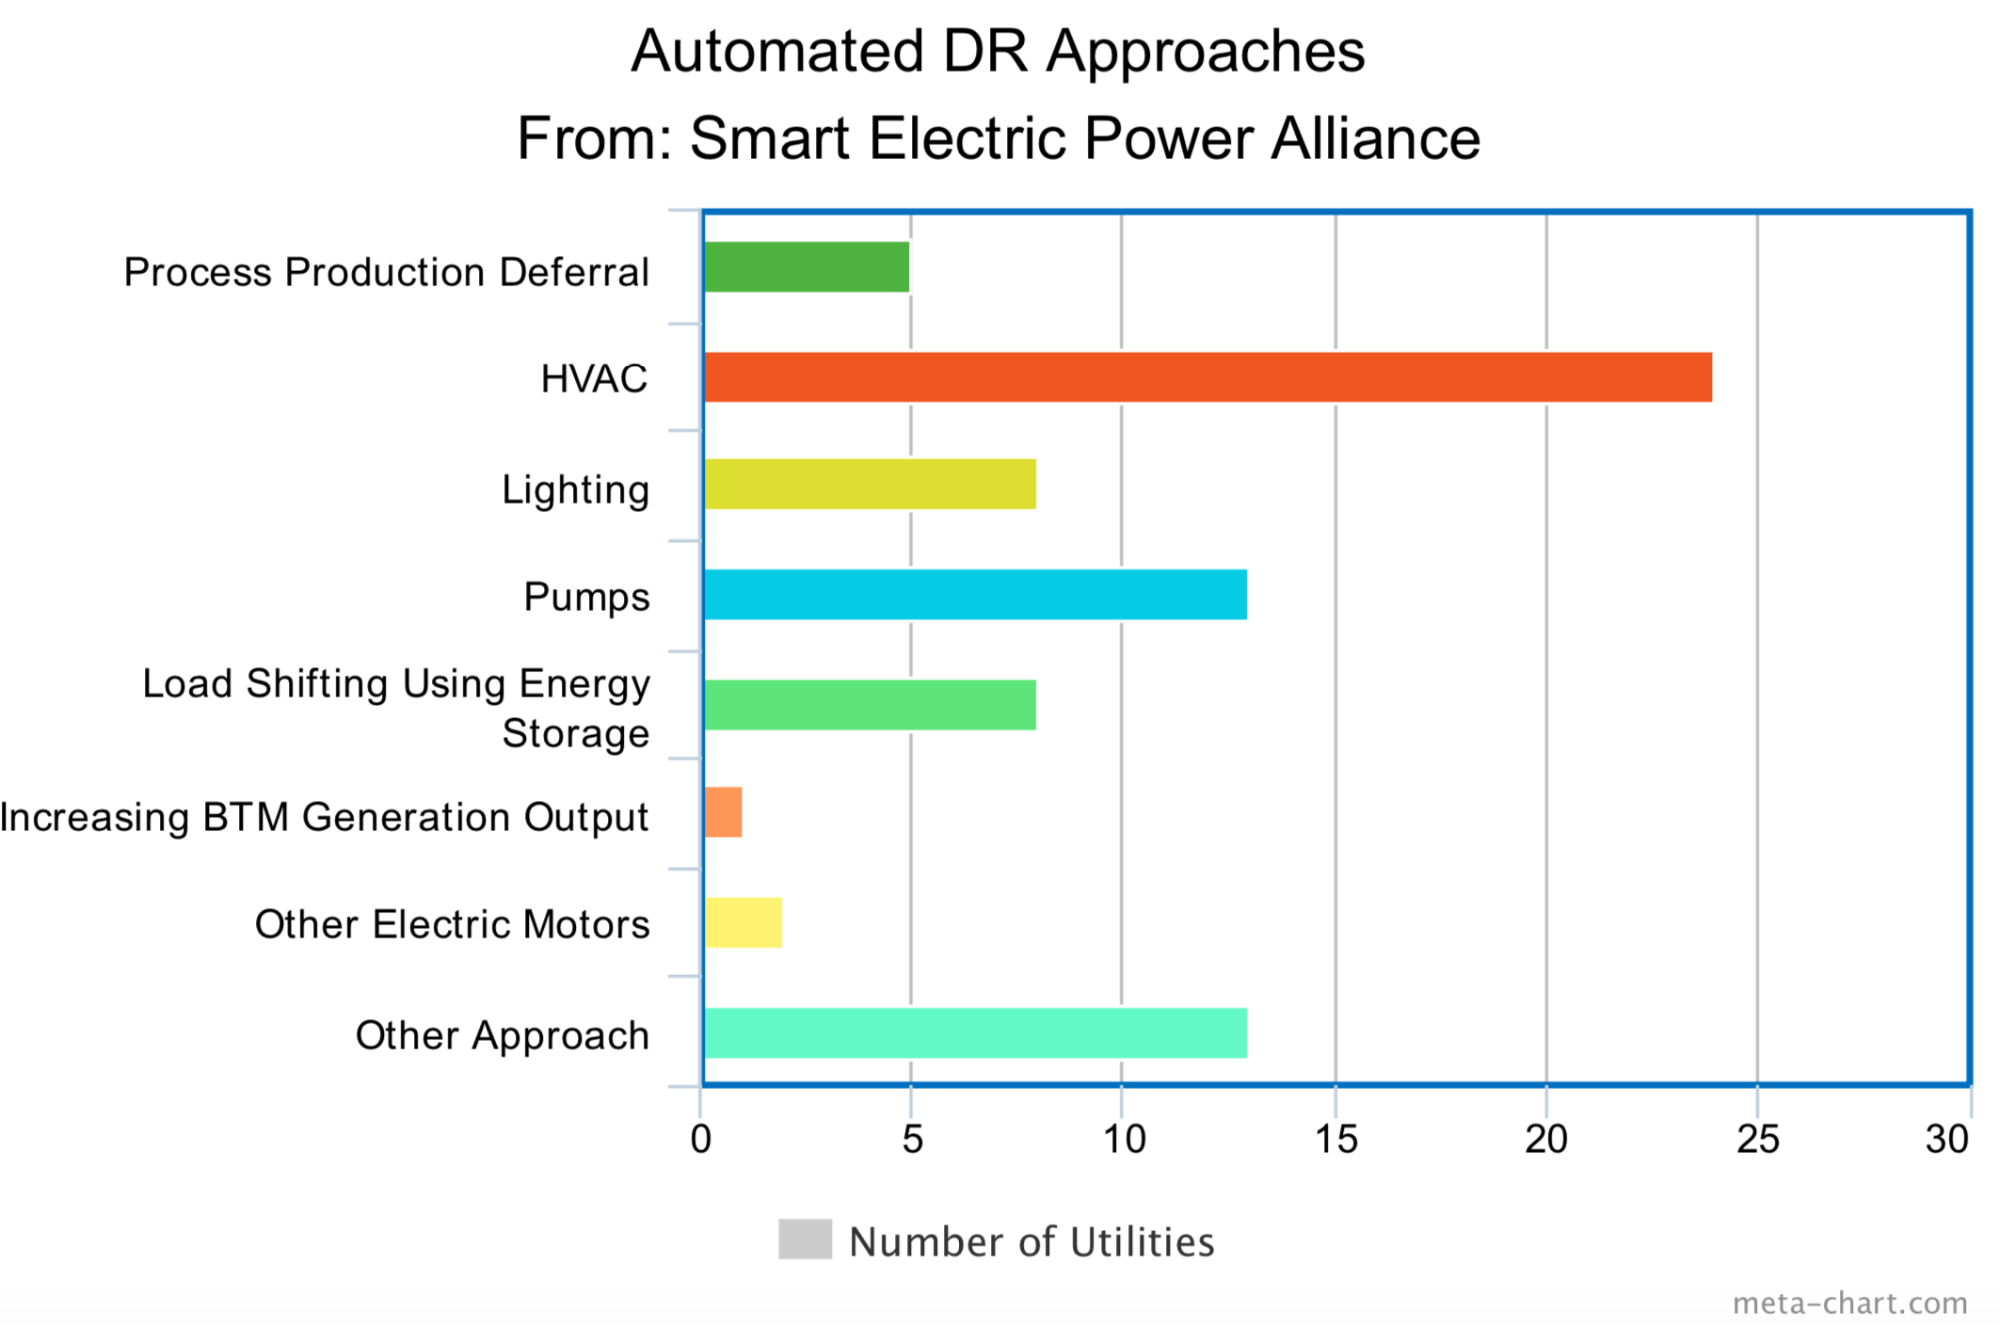 Automated DR approaches from Smart Electric Power Alliance